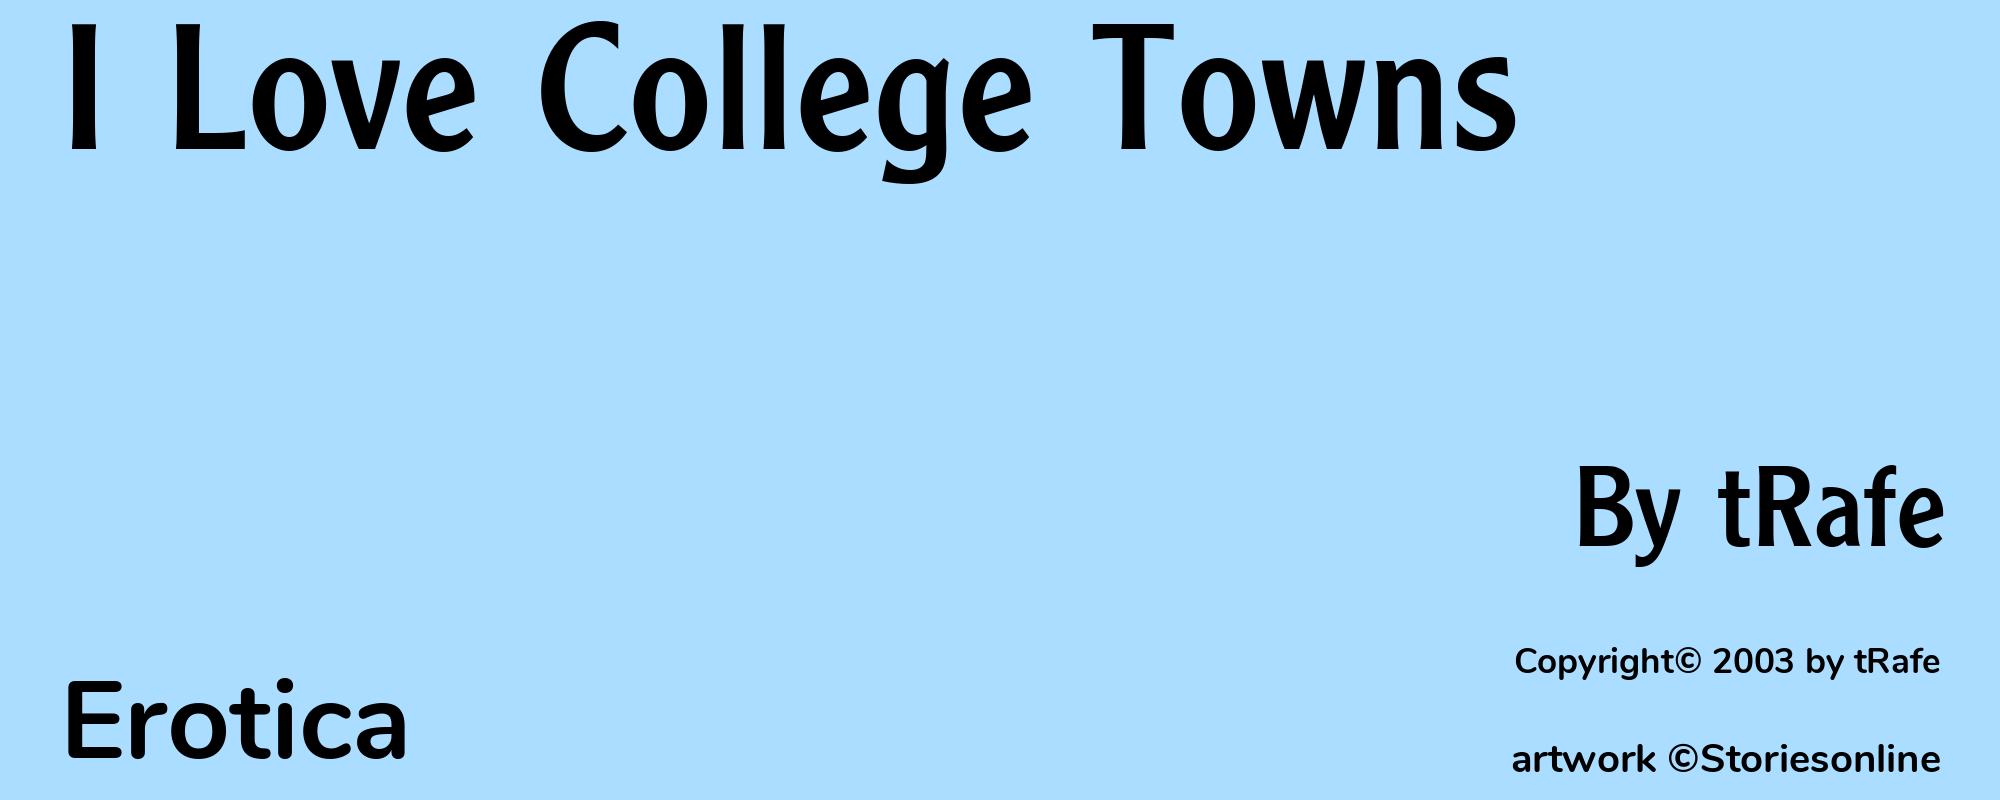 I Love College Towns - Cover